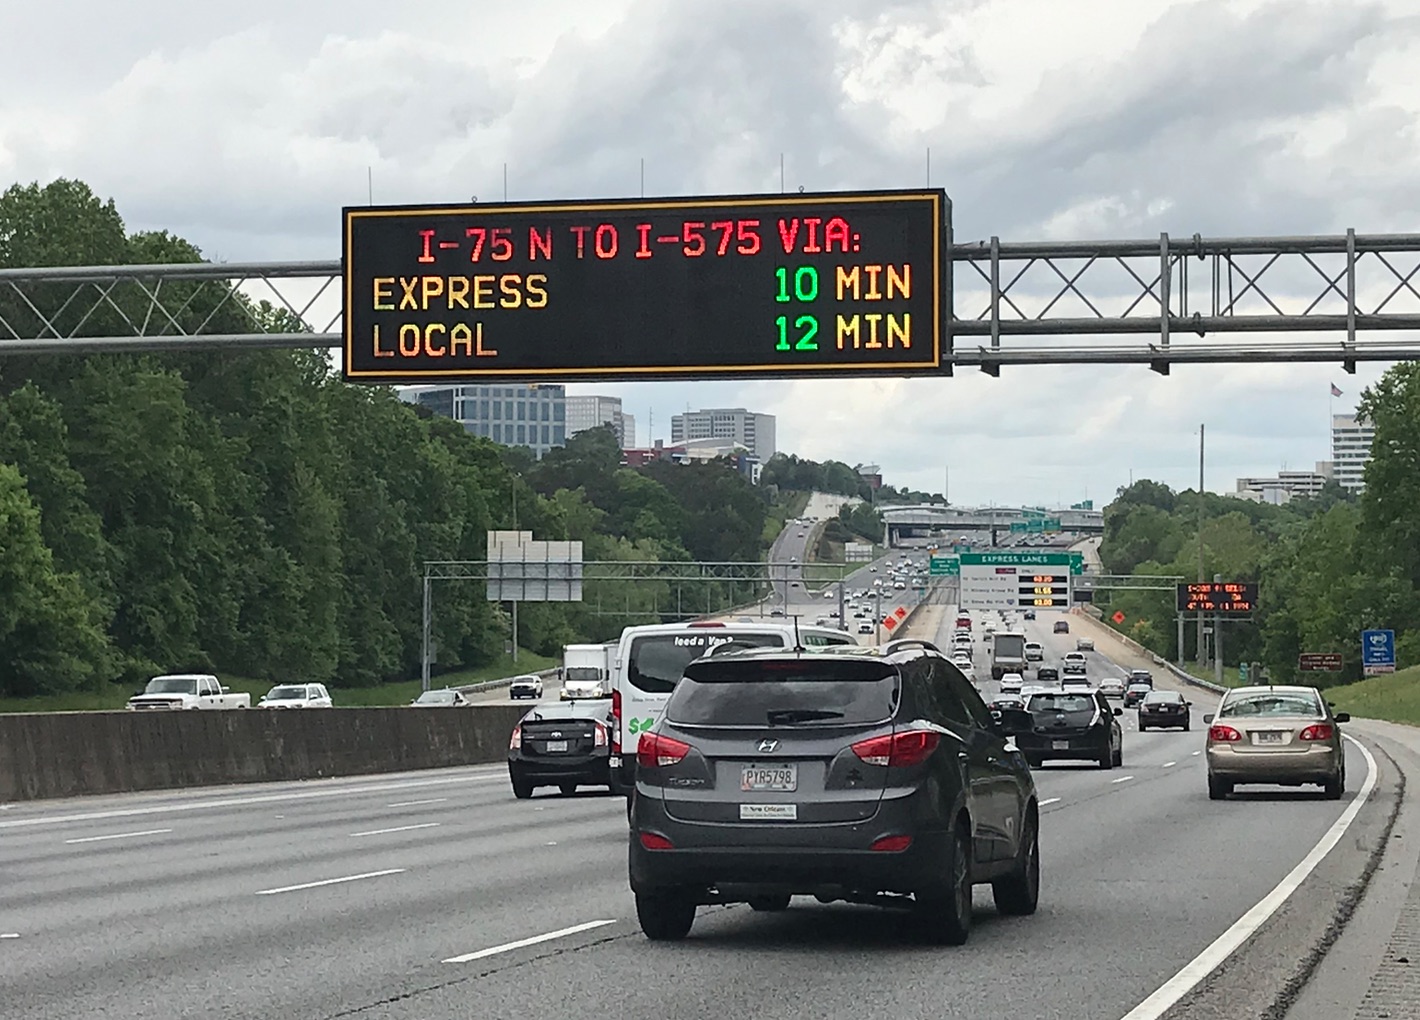 Congrestion pricing, toll lanes